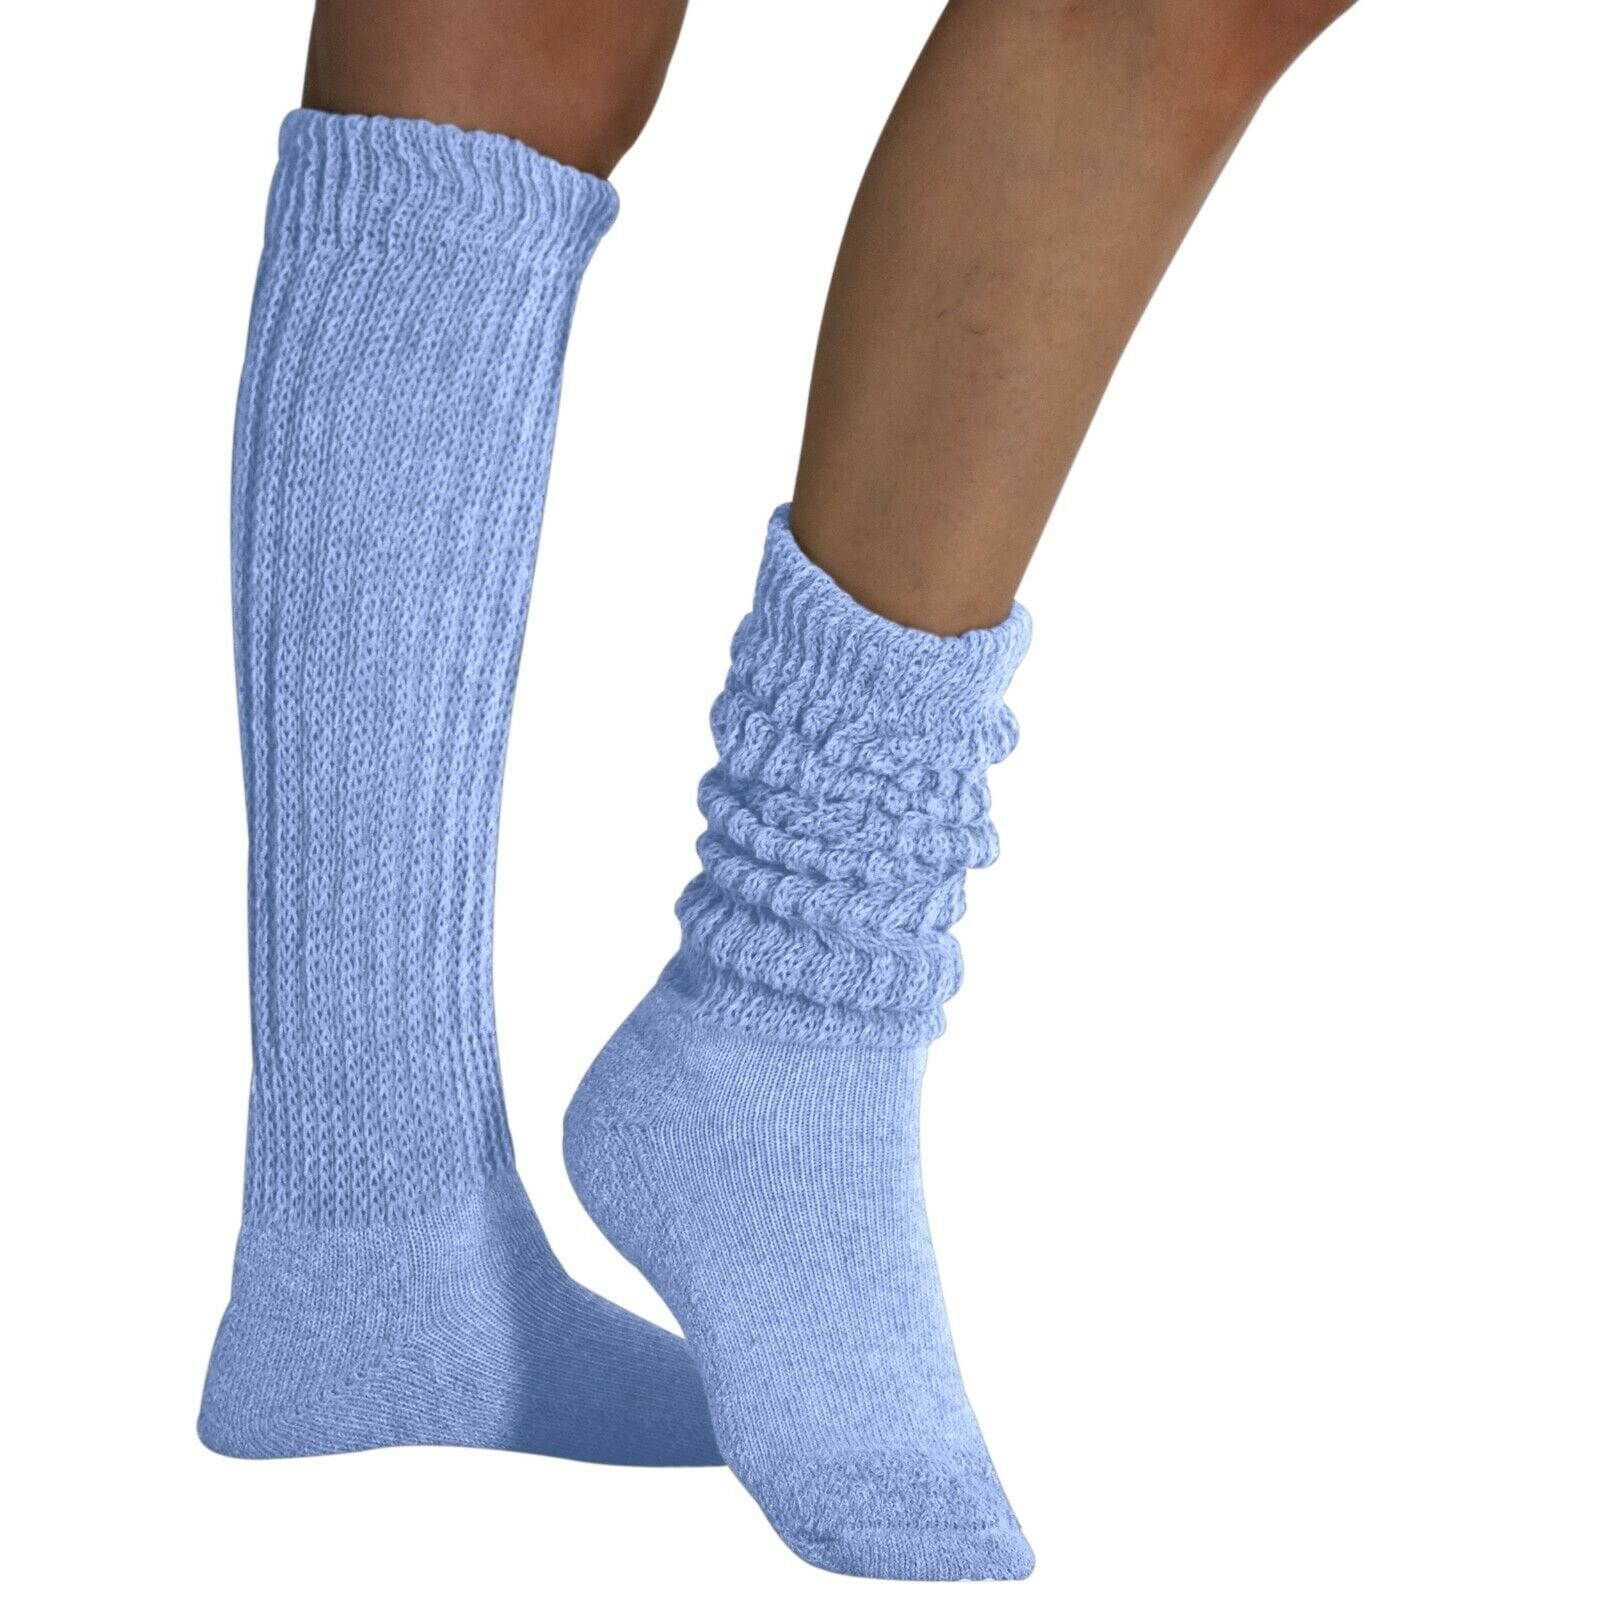 MDR Women's Extra Long Heavy Slouch Cotton Socks Made in USA 1 Pair Size 9 to... - Mdrdistributors